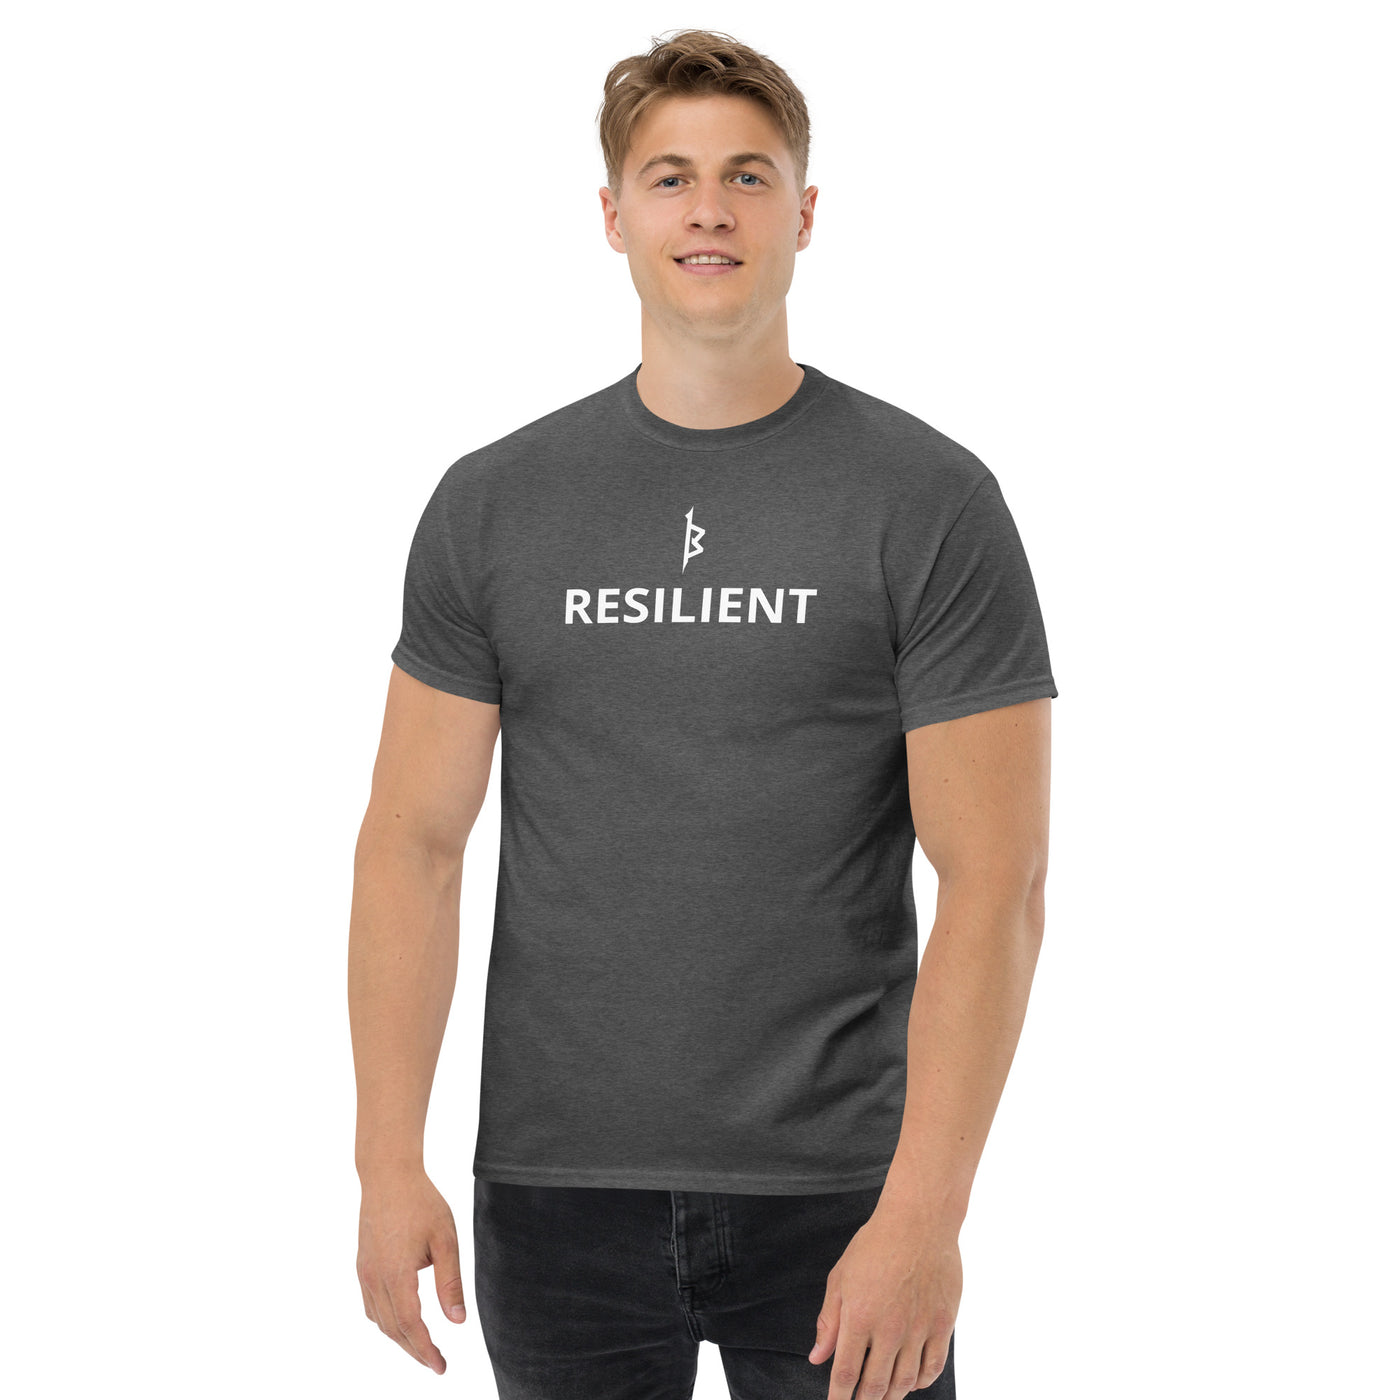 RESILIENT CLASSIC TEE